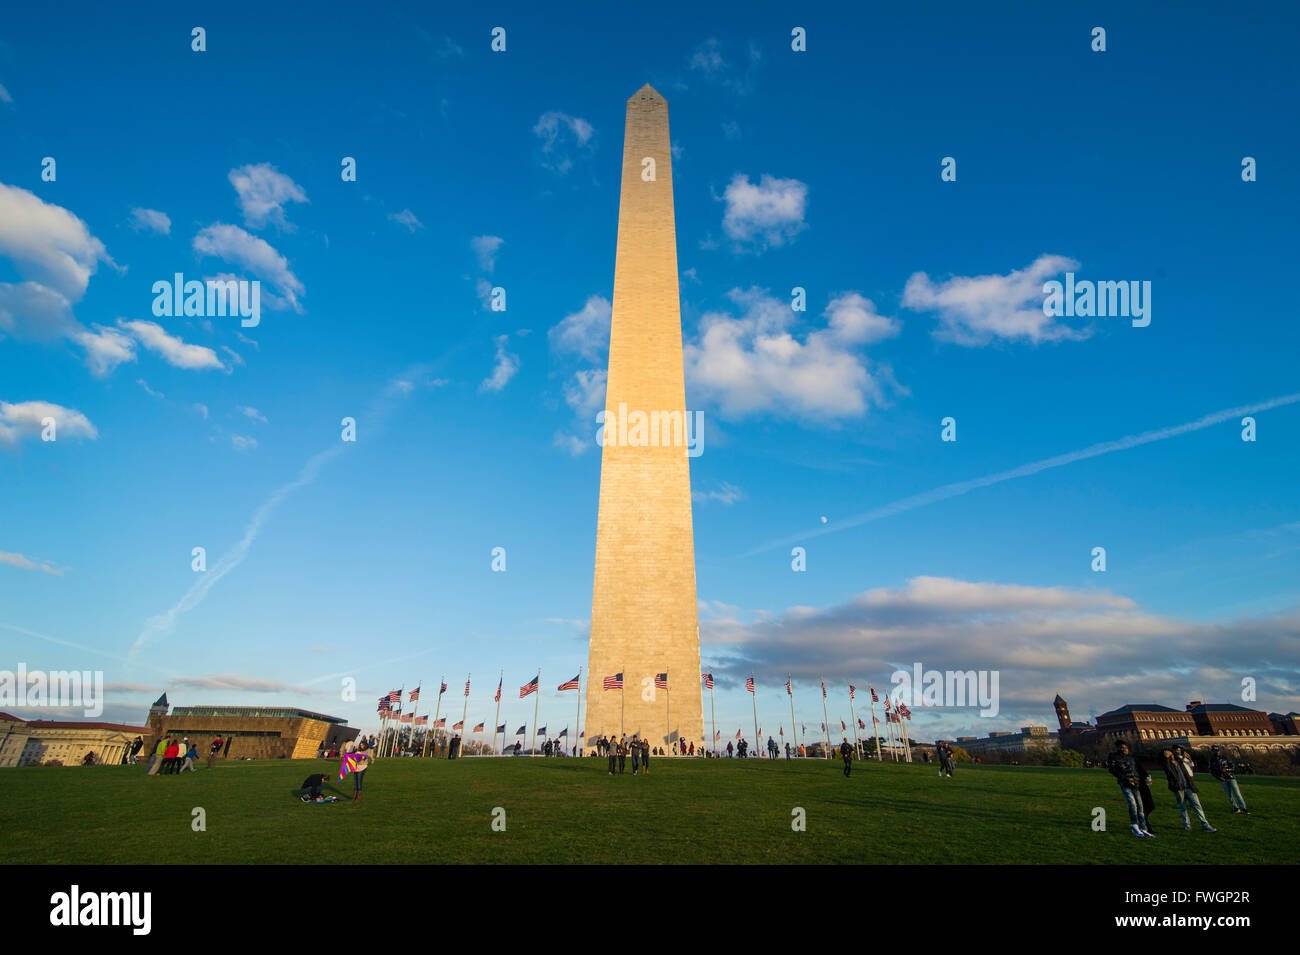 Obelisk of the Washington Monument at the Mall,  Washington, District of Columbia, United States of America, North America Stock Photo